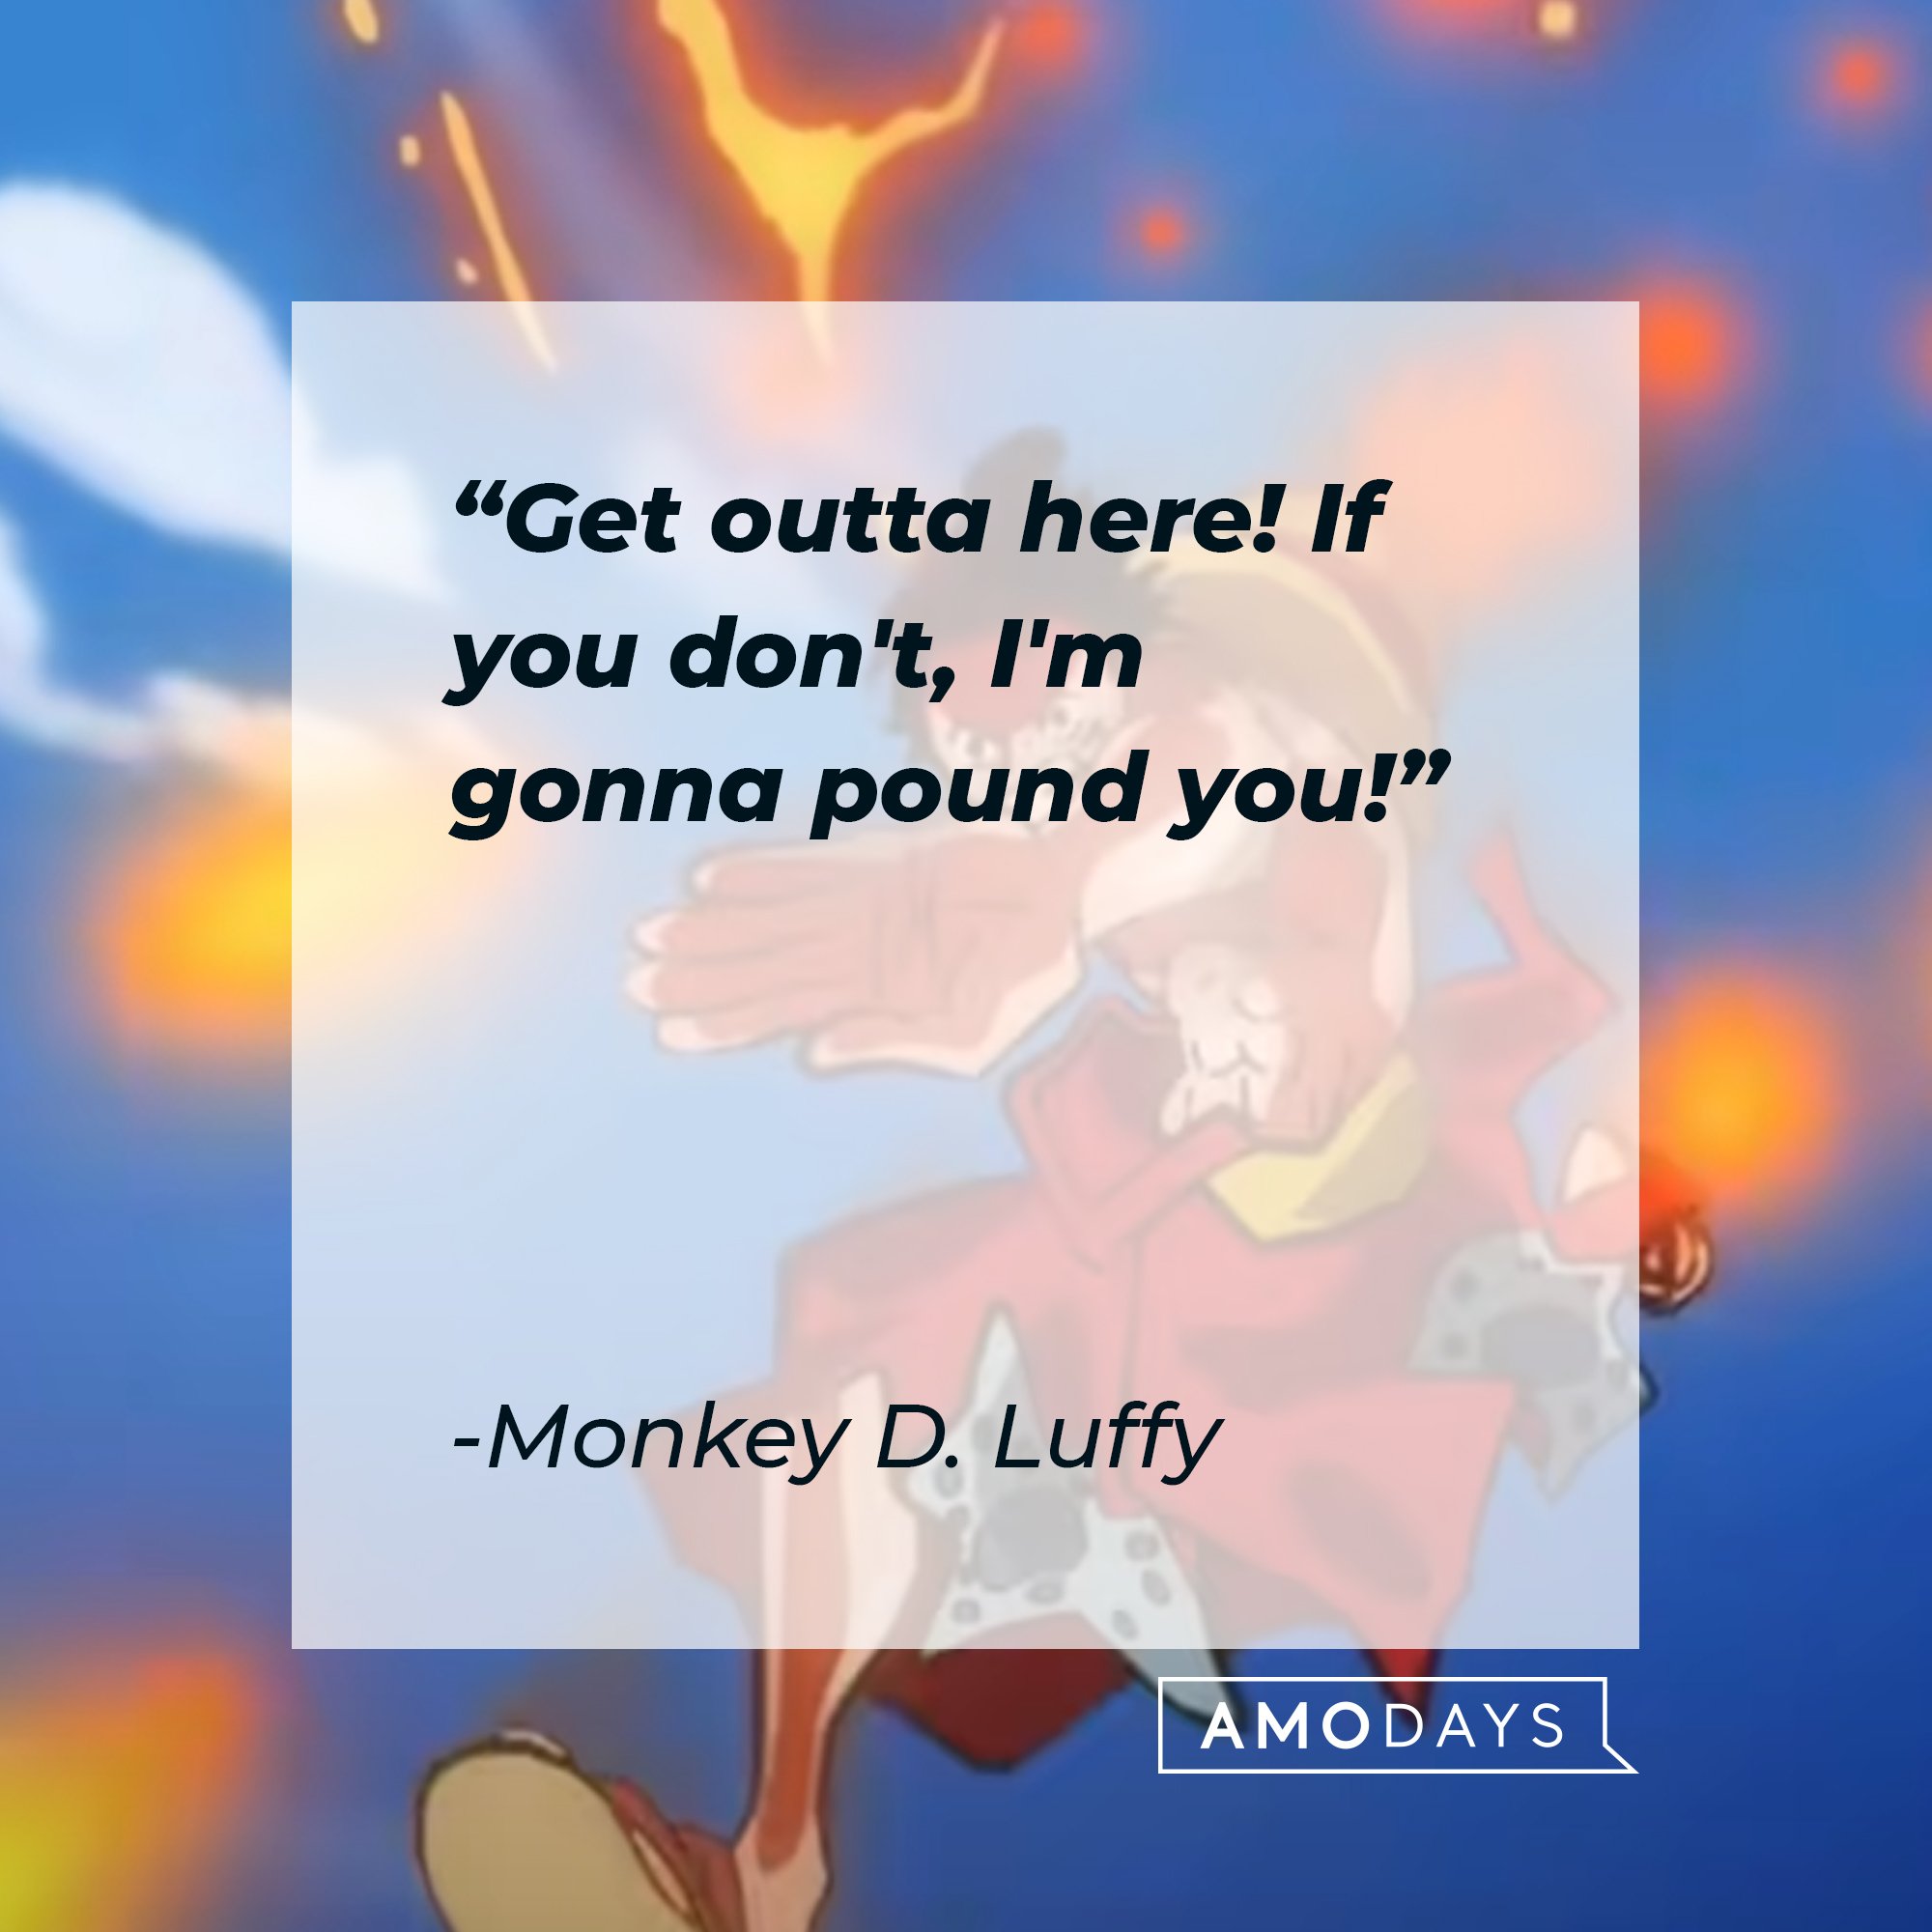 Monkey D. Luffy's quote: "Get outta here! If you don't, I'm gonna pound you!"  |  Image: AmoDays